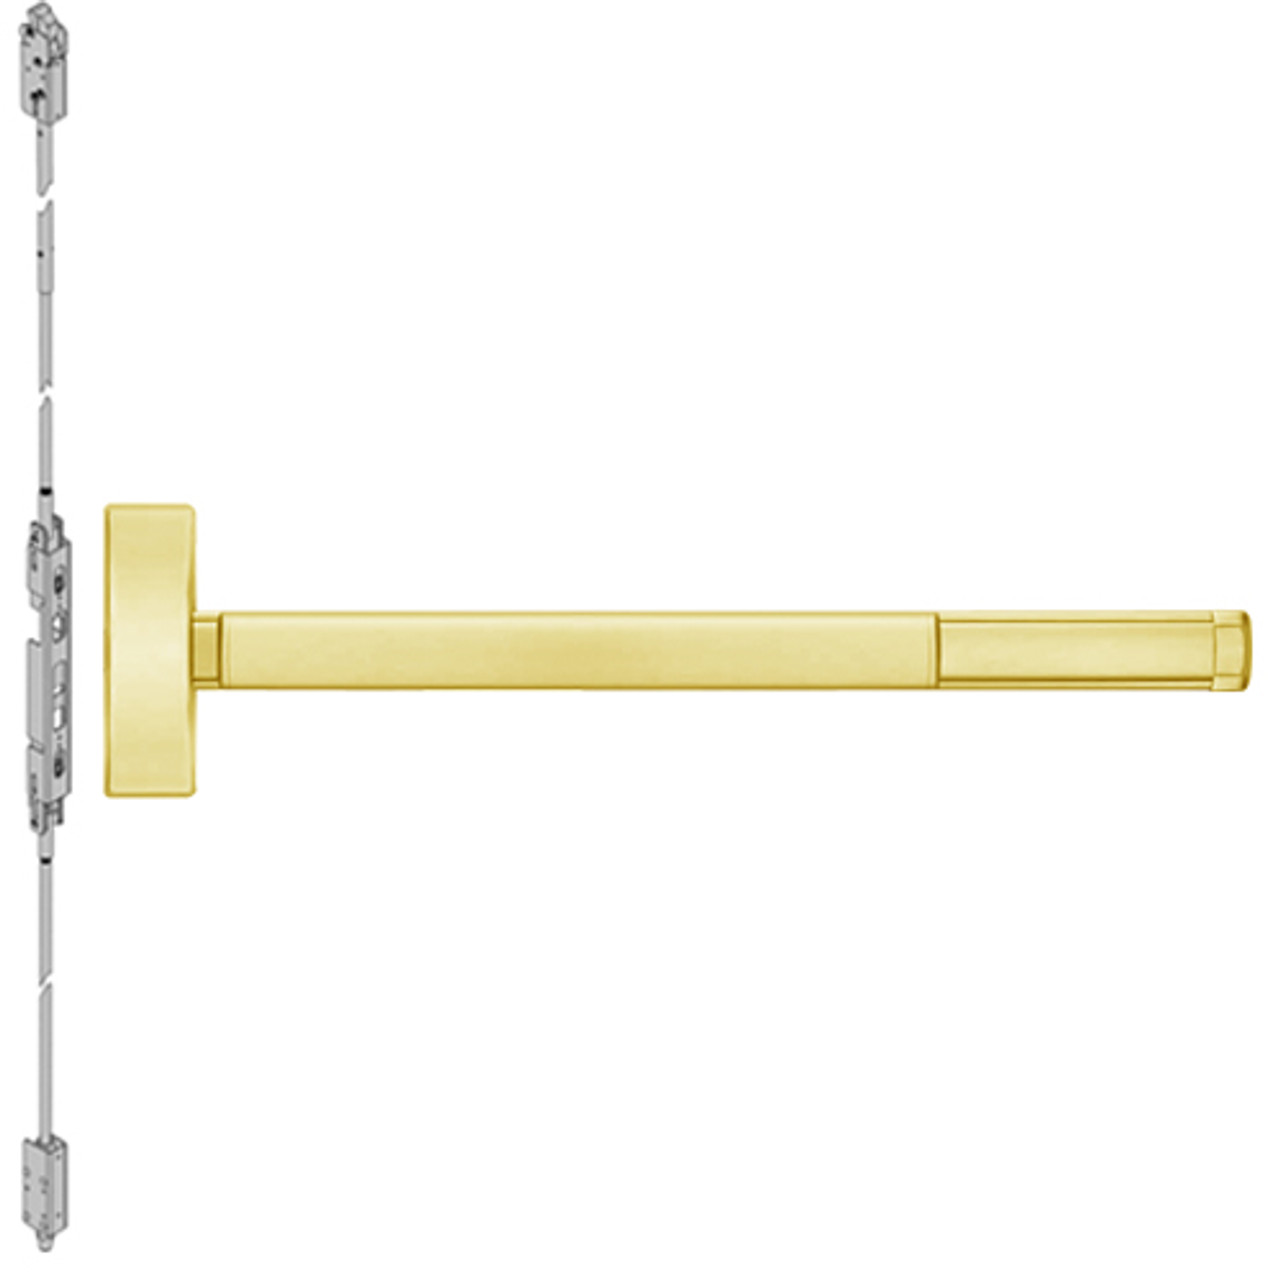 ELRFL2808-605-48 PHI 2800 Series Fire Rated Concealed Vertical Rod Exit Device with Electric Latch Retraction Prepped for Key Controls Lever-Knob in Bright Brass Finish